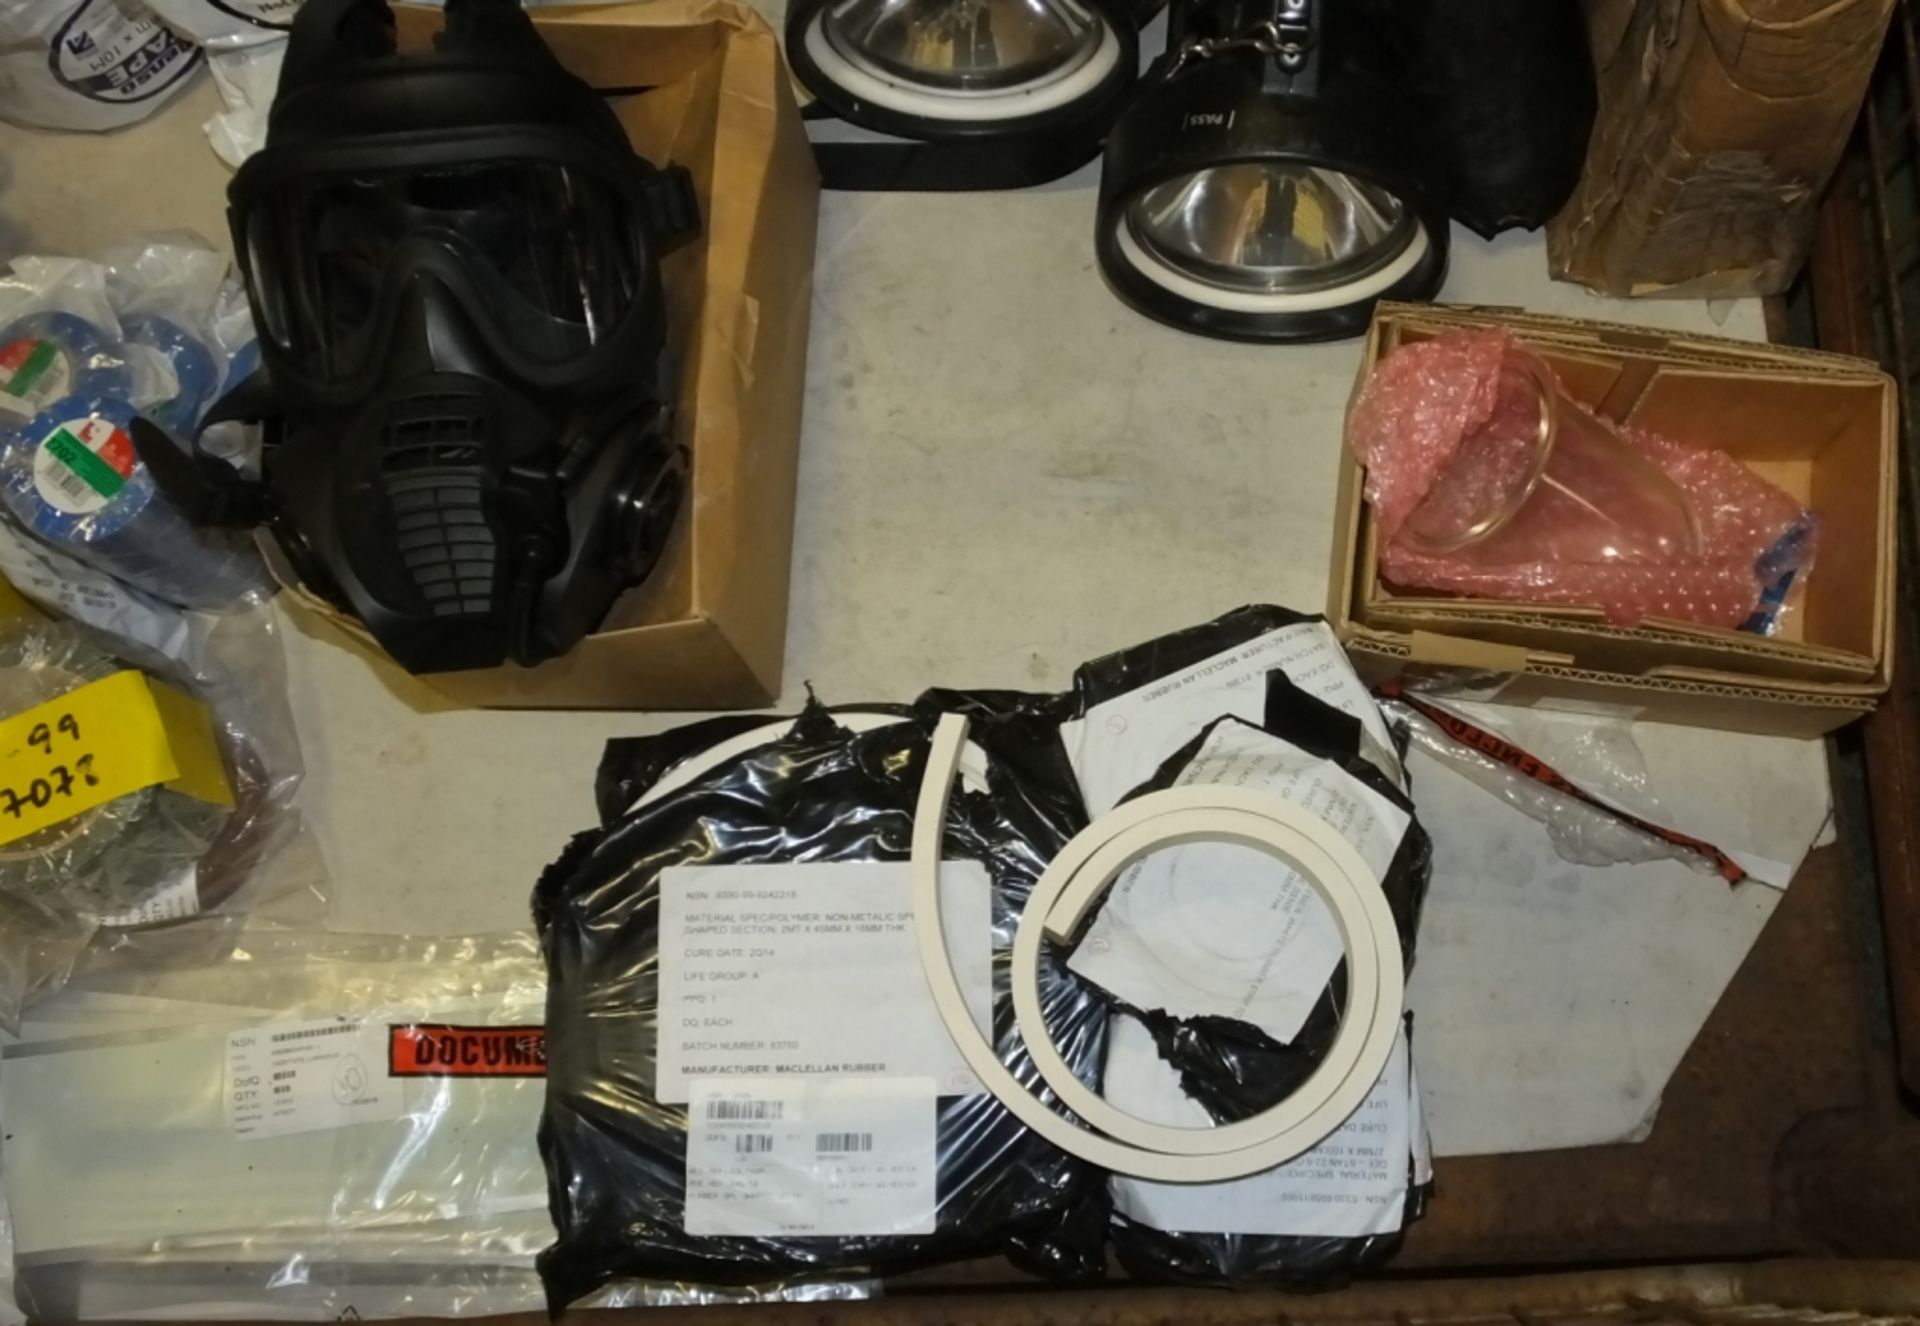 Tool box, Panel resin, Dragon Searchlights, Tape, Hose assemblies, Safety Mask - Image 5 of 5